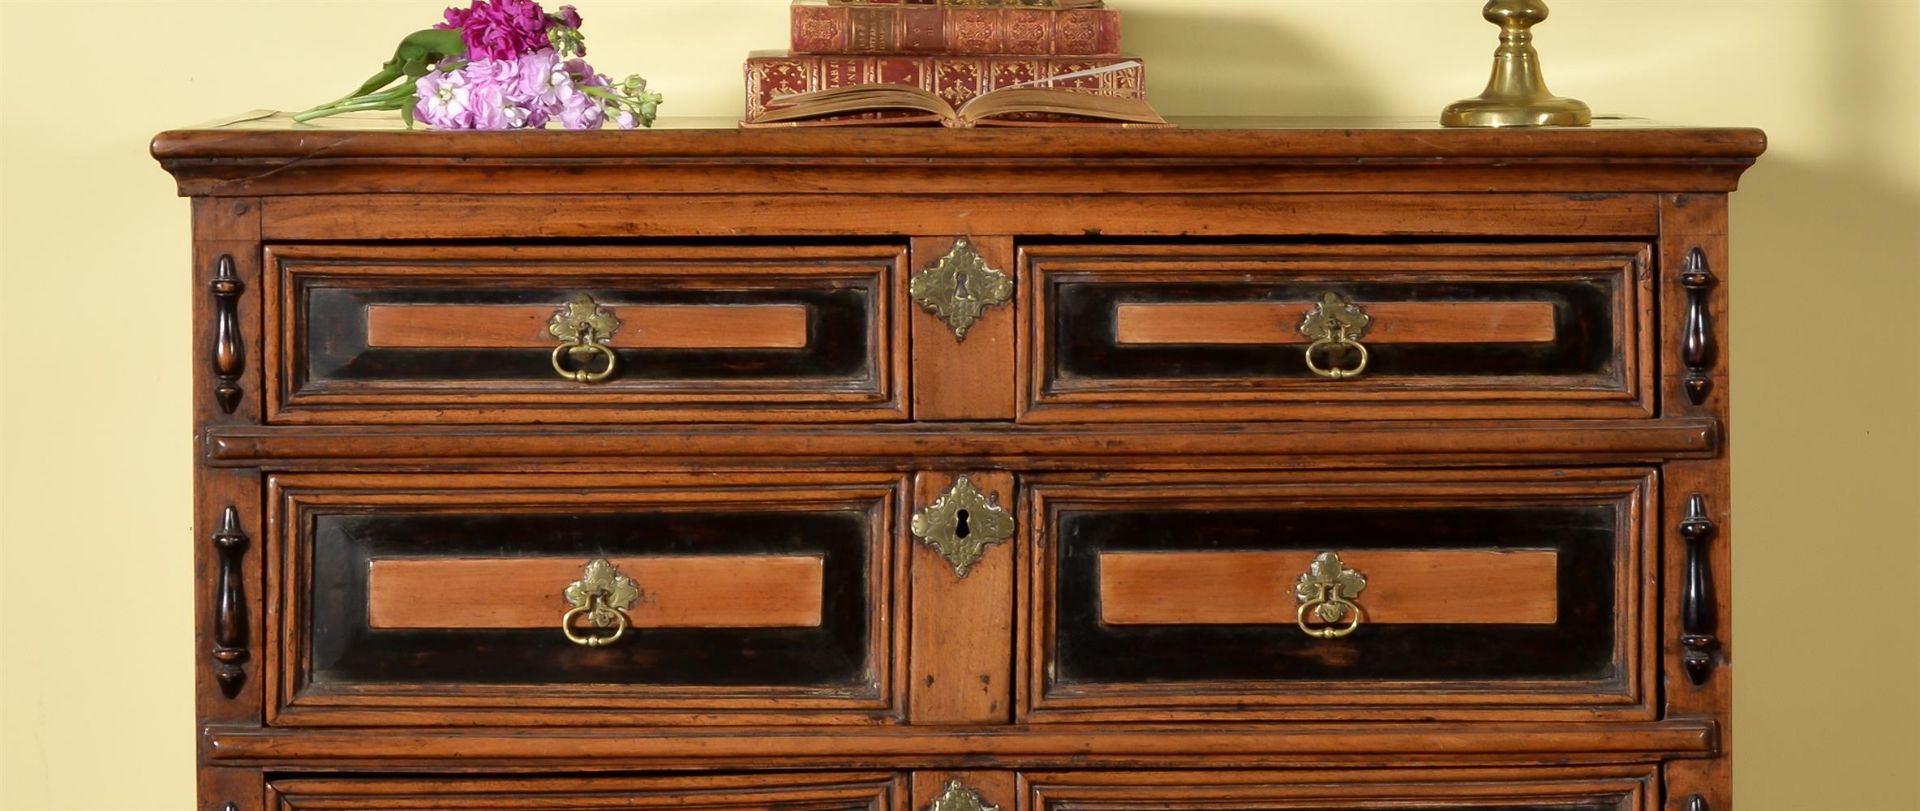 A WILLIAM & MARY WALNUT AND EBONISED CHEST OF DRAWERS, CIRCA 1690 - Image 3 of 4